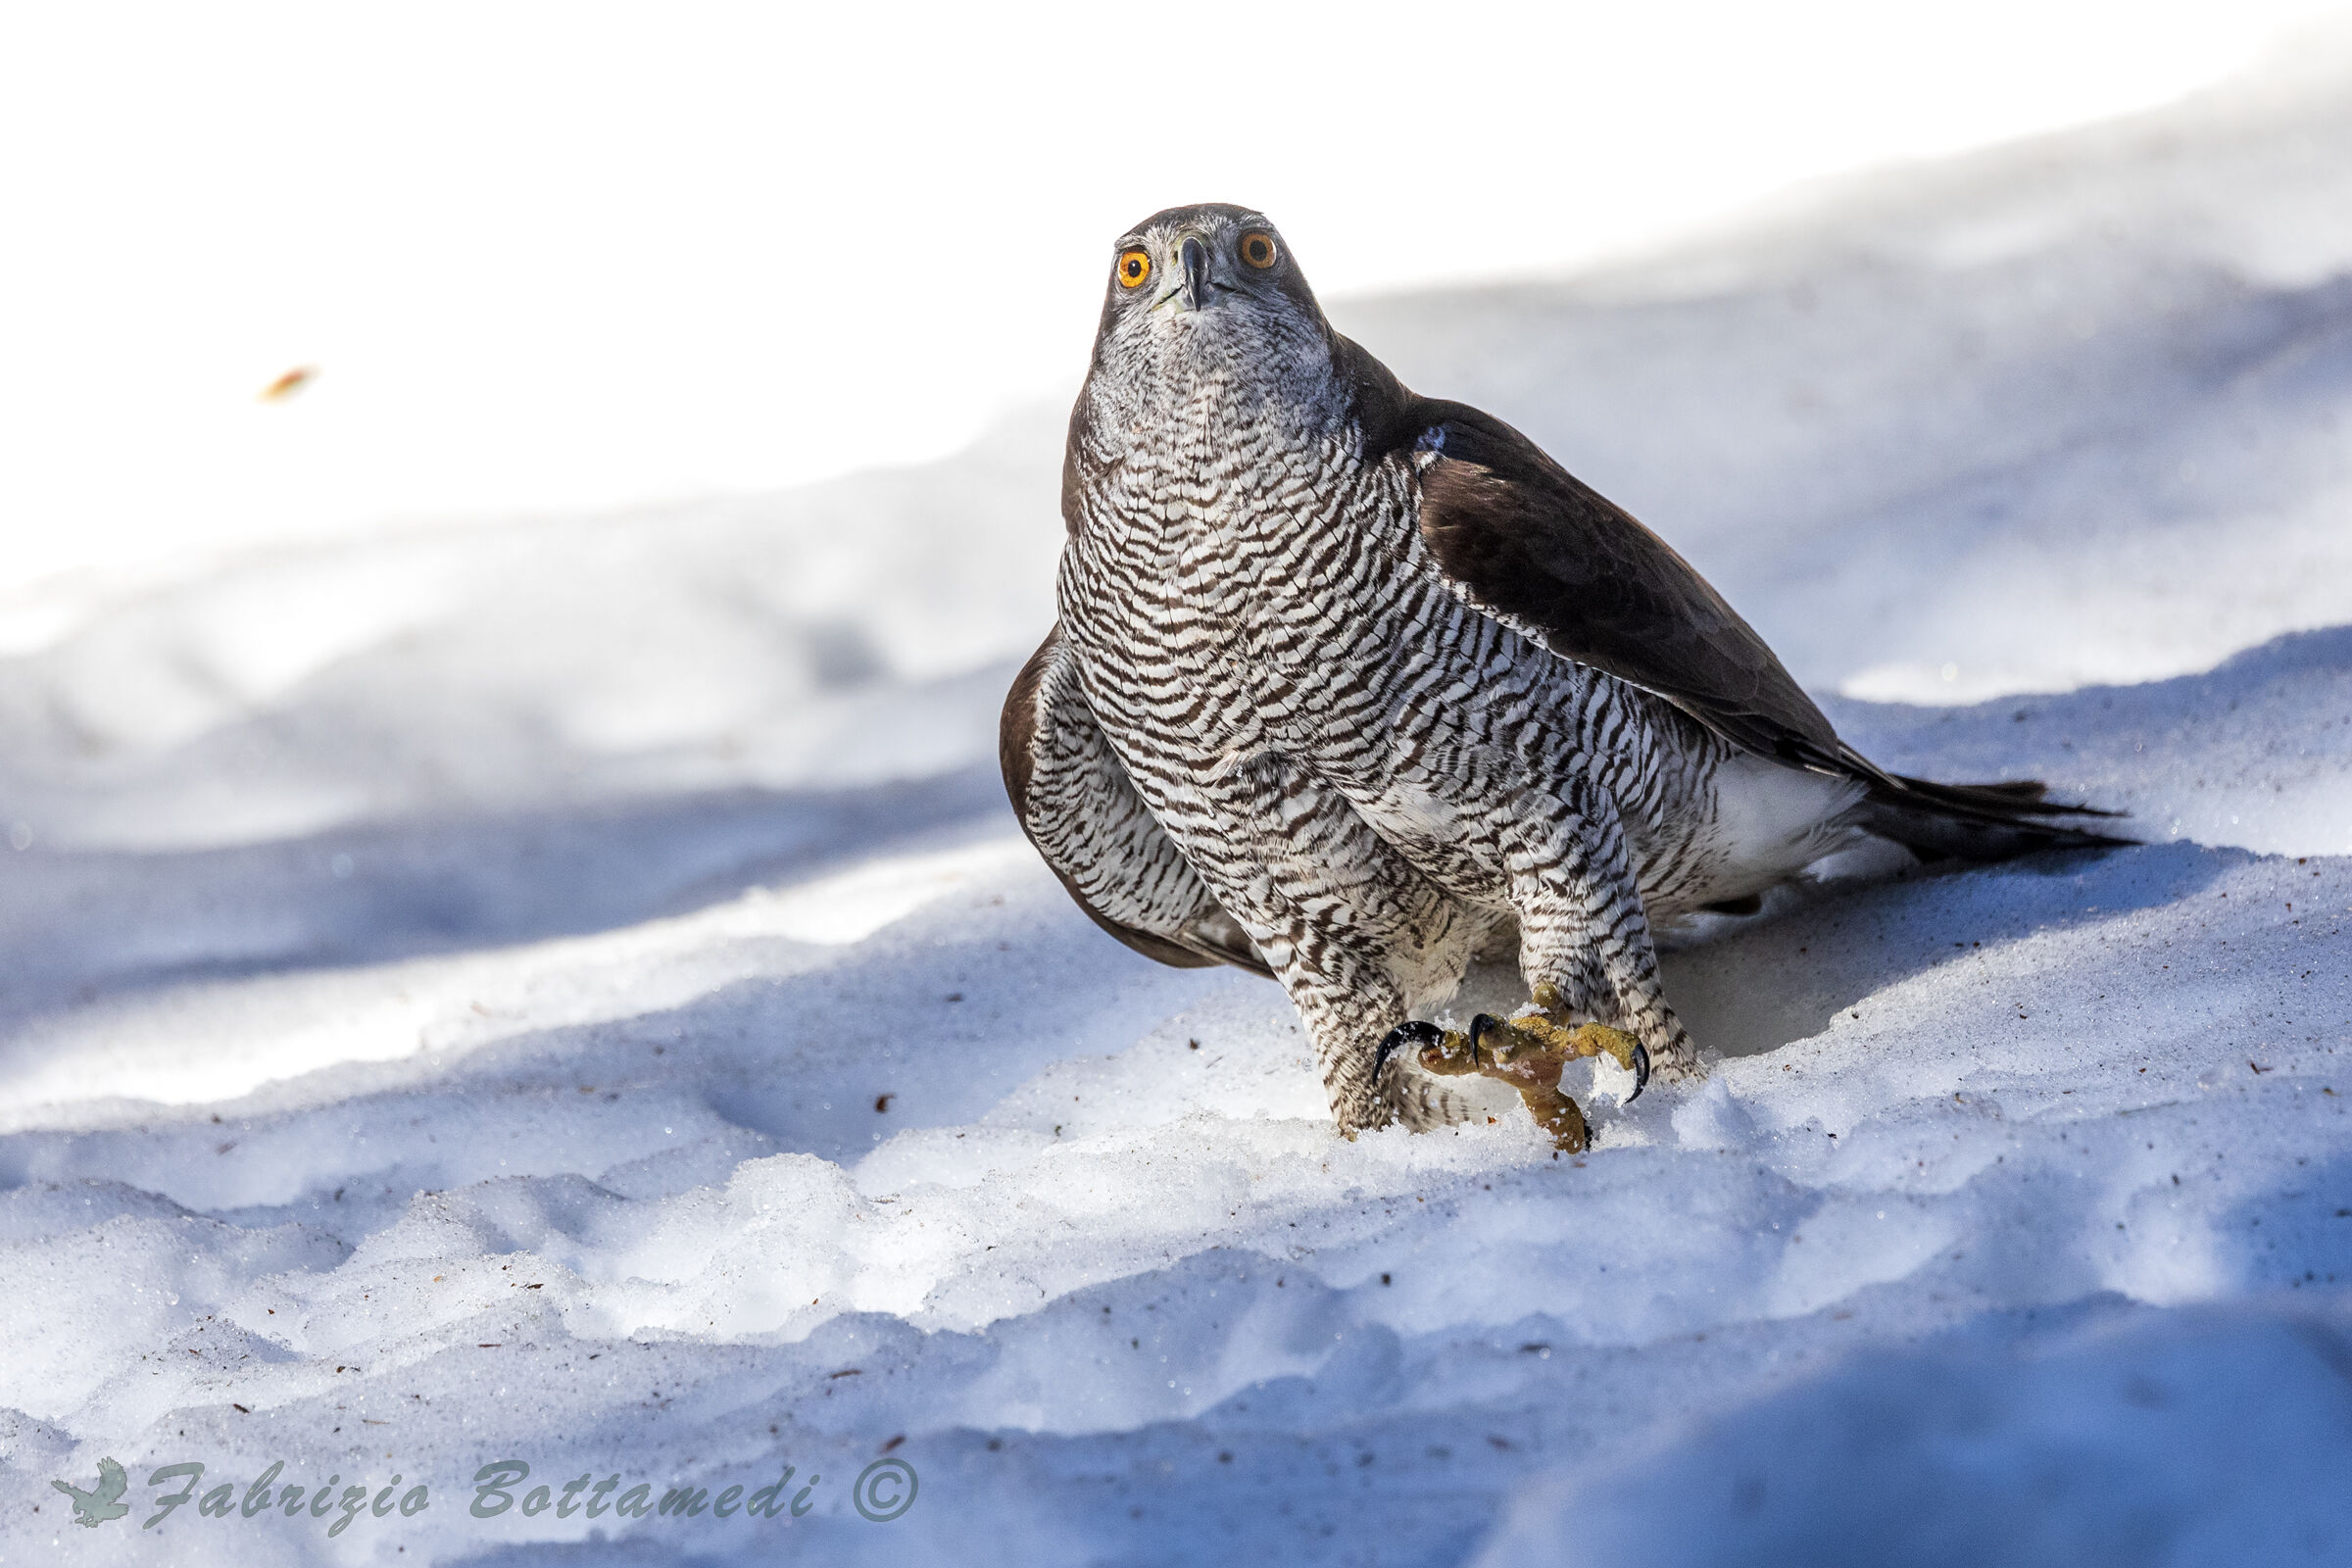 The claws of the goshawk...